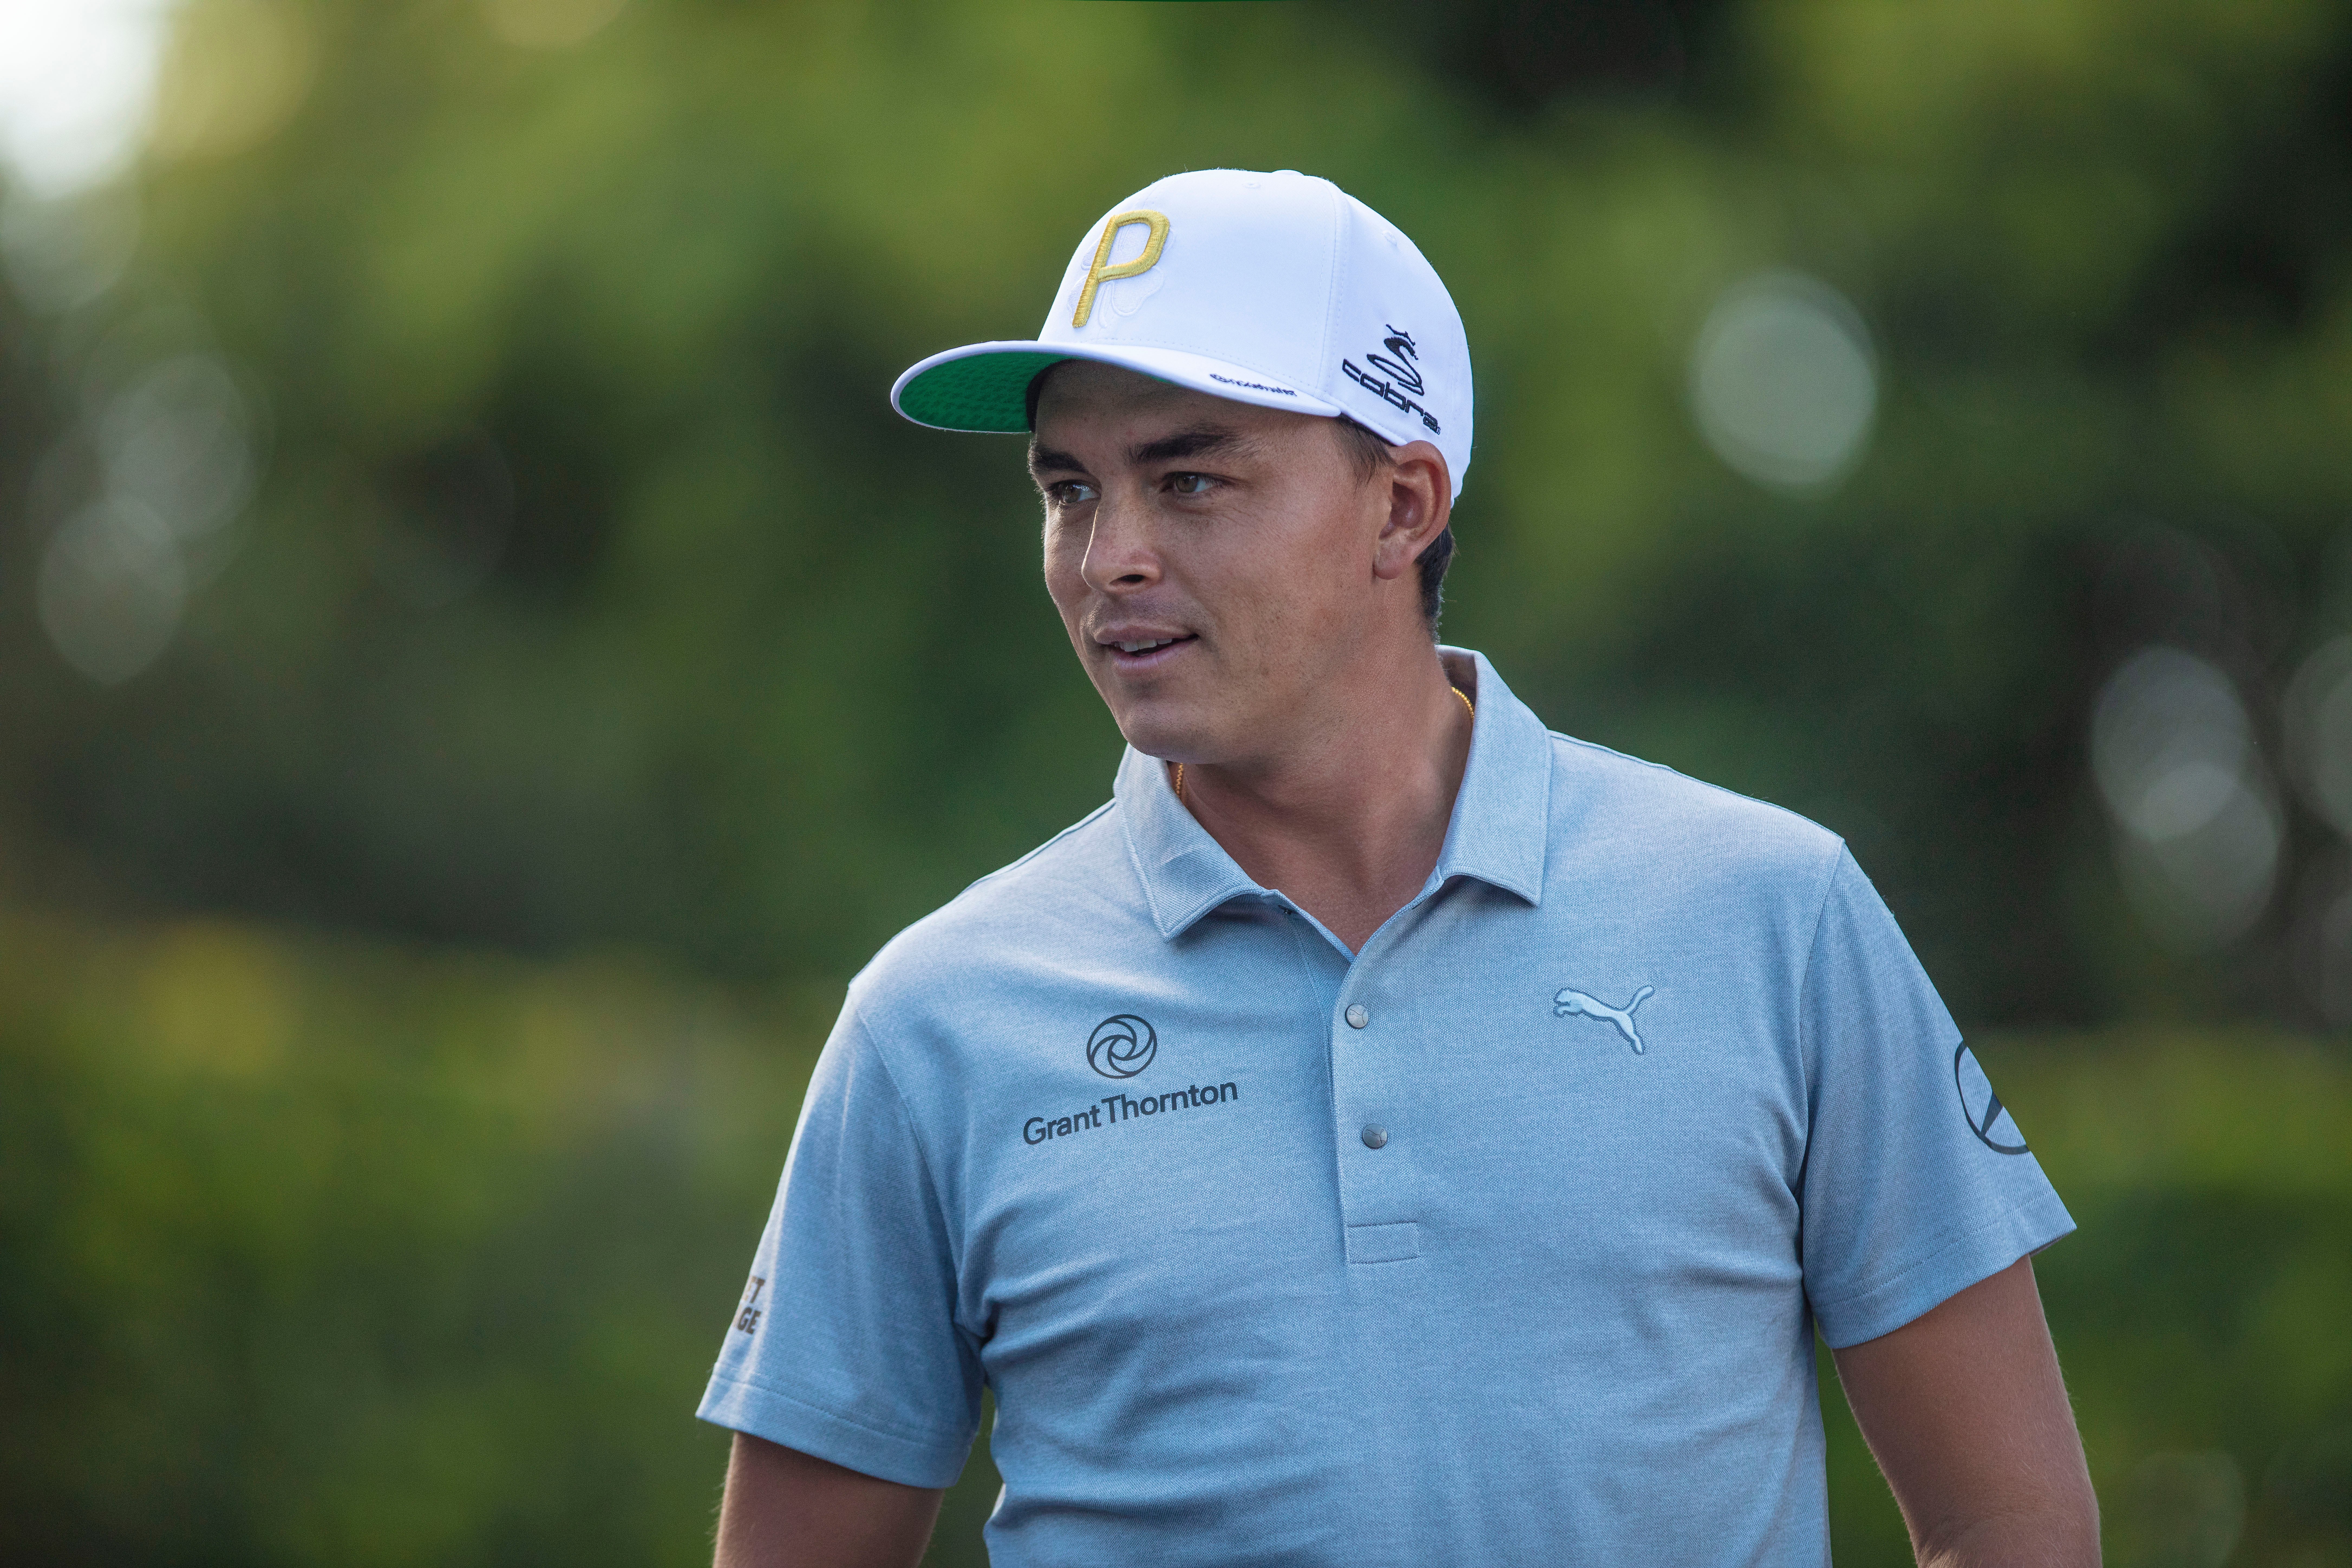 Rickie Fowler wearing the special edition Puma St. Patrick's Day hat.